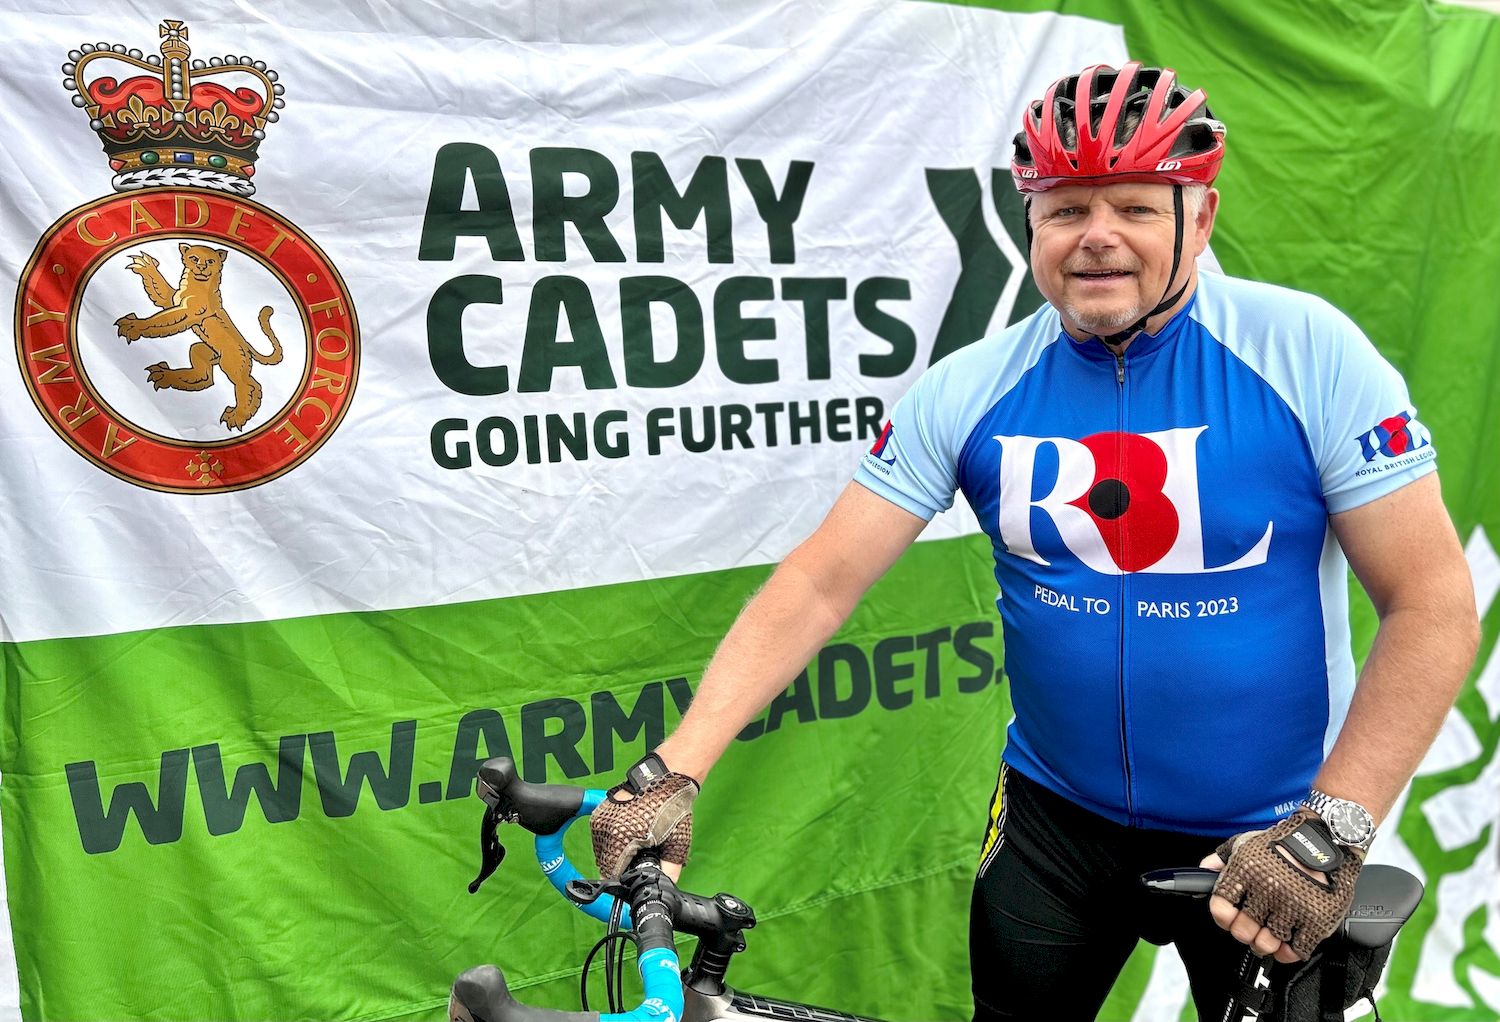 Jim wears his Royal British Legion cycling uniform, standing smiling with his bike in front of an Army Cadets banner